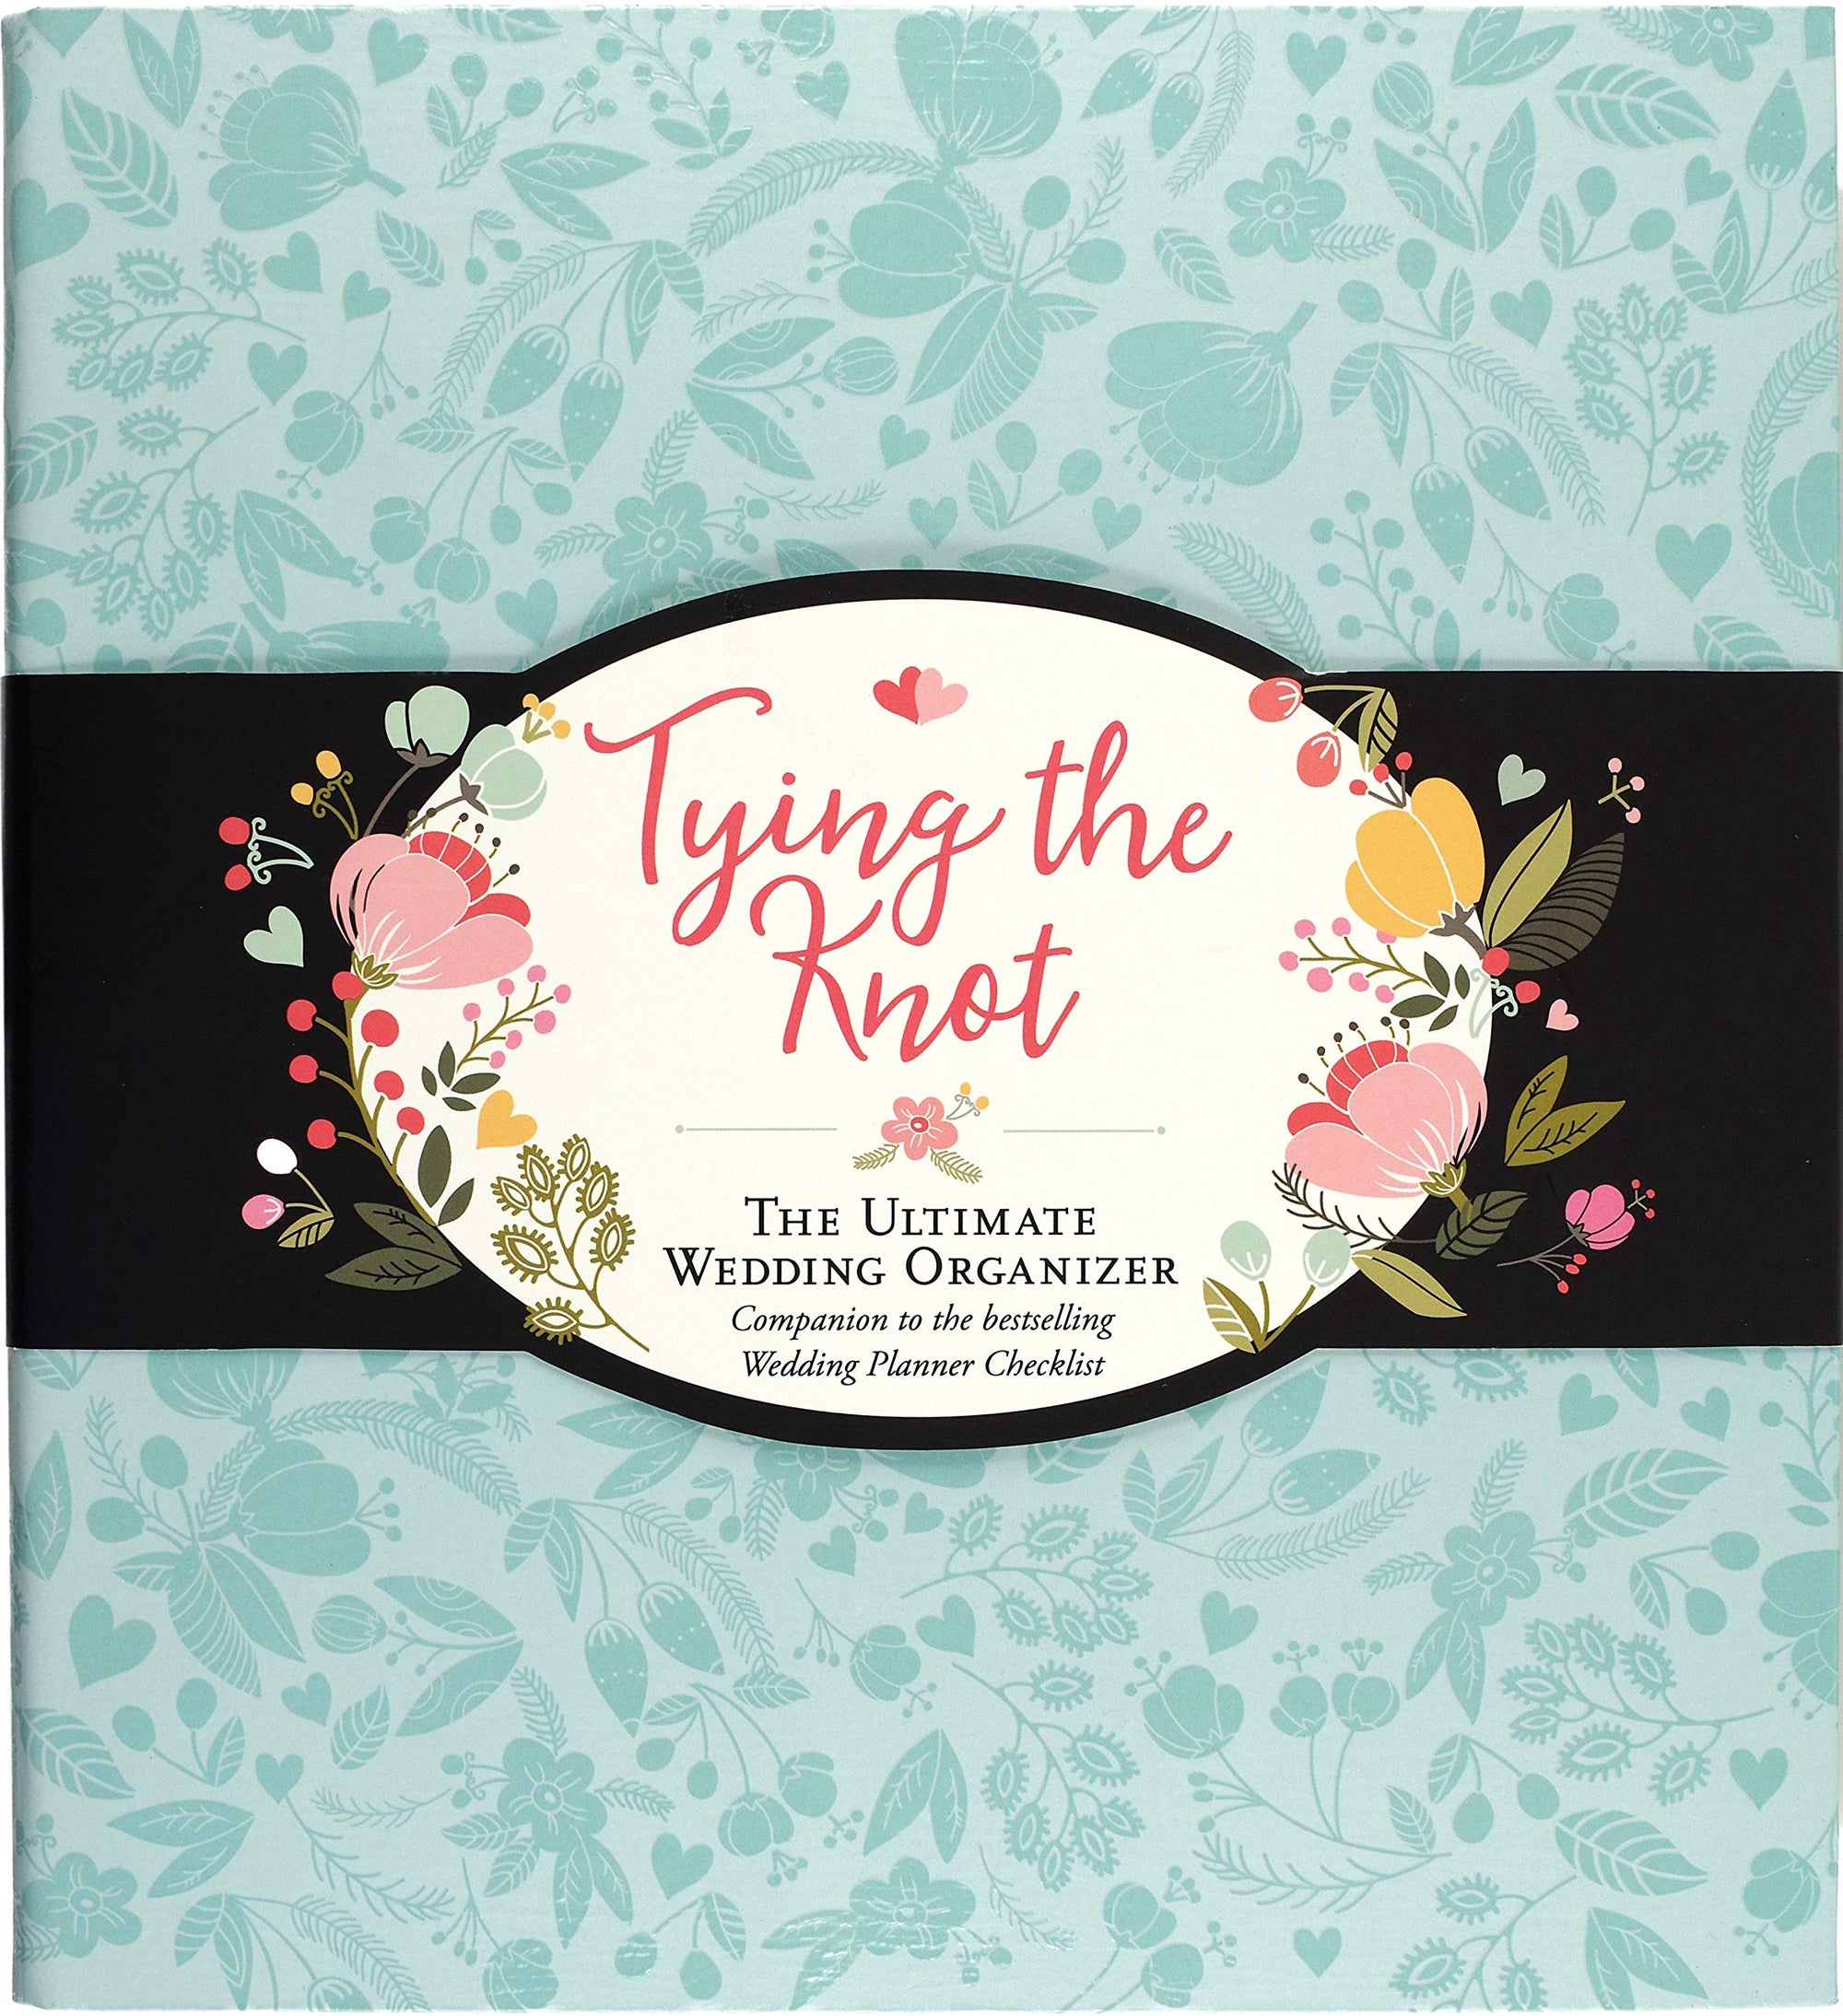 Tying the Knot: The Ultimate Wedding Organizer